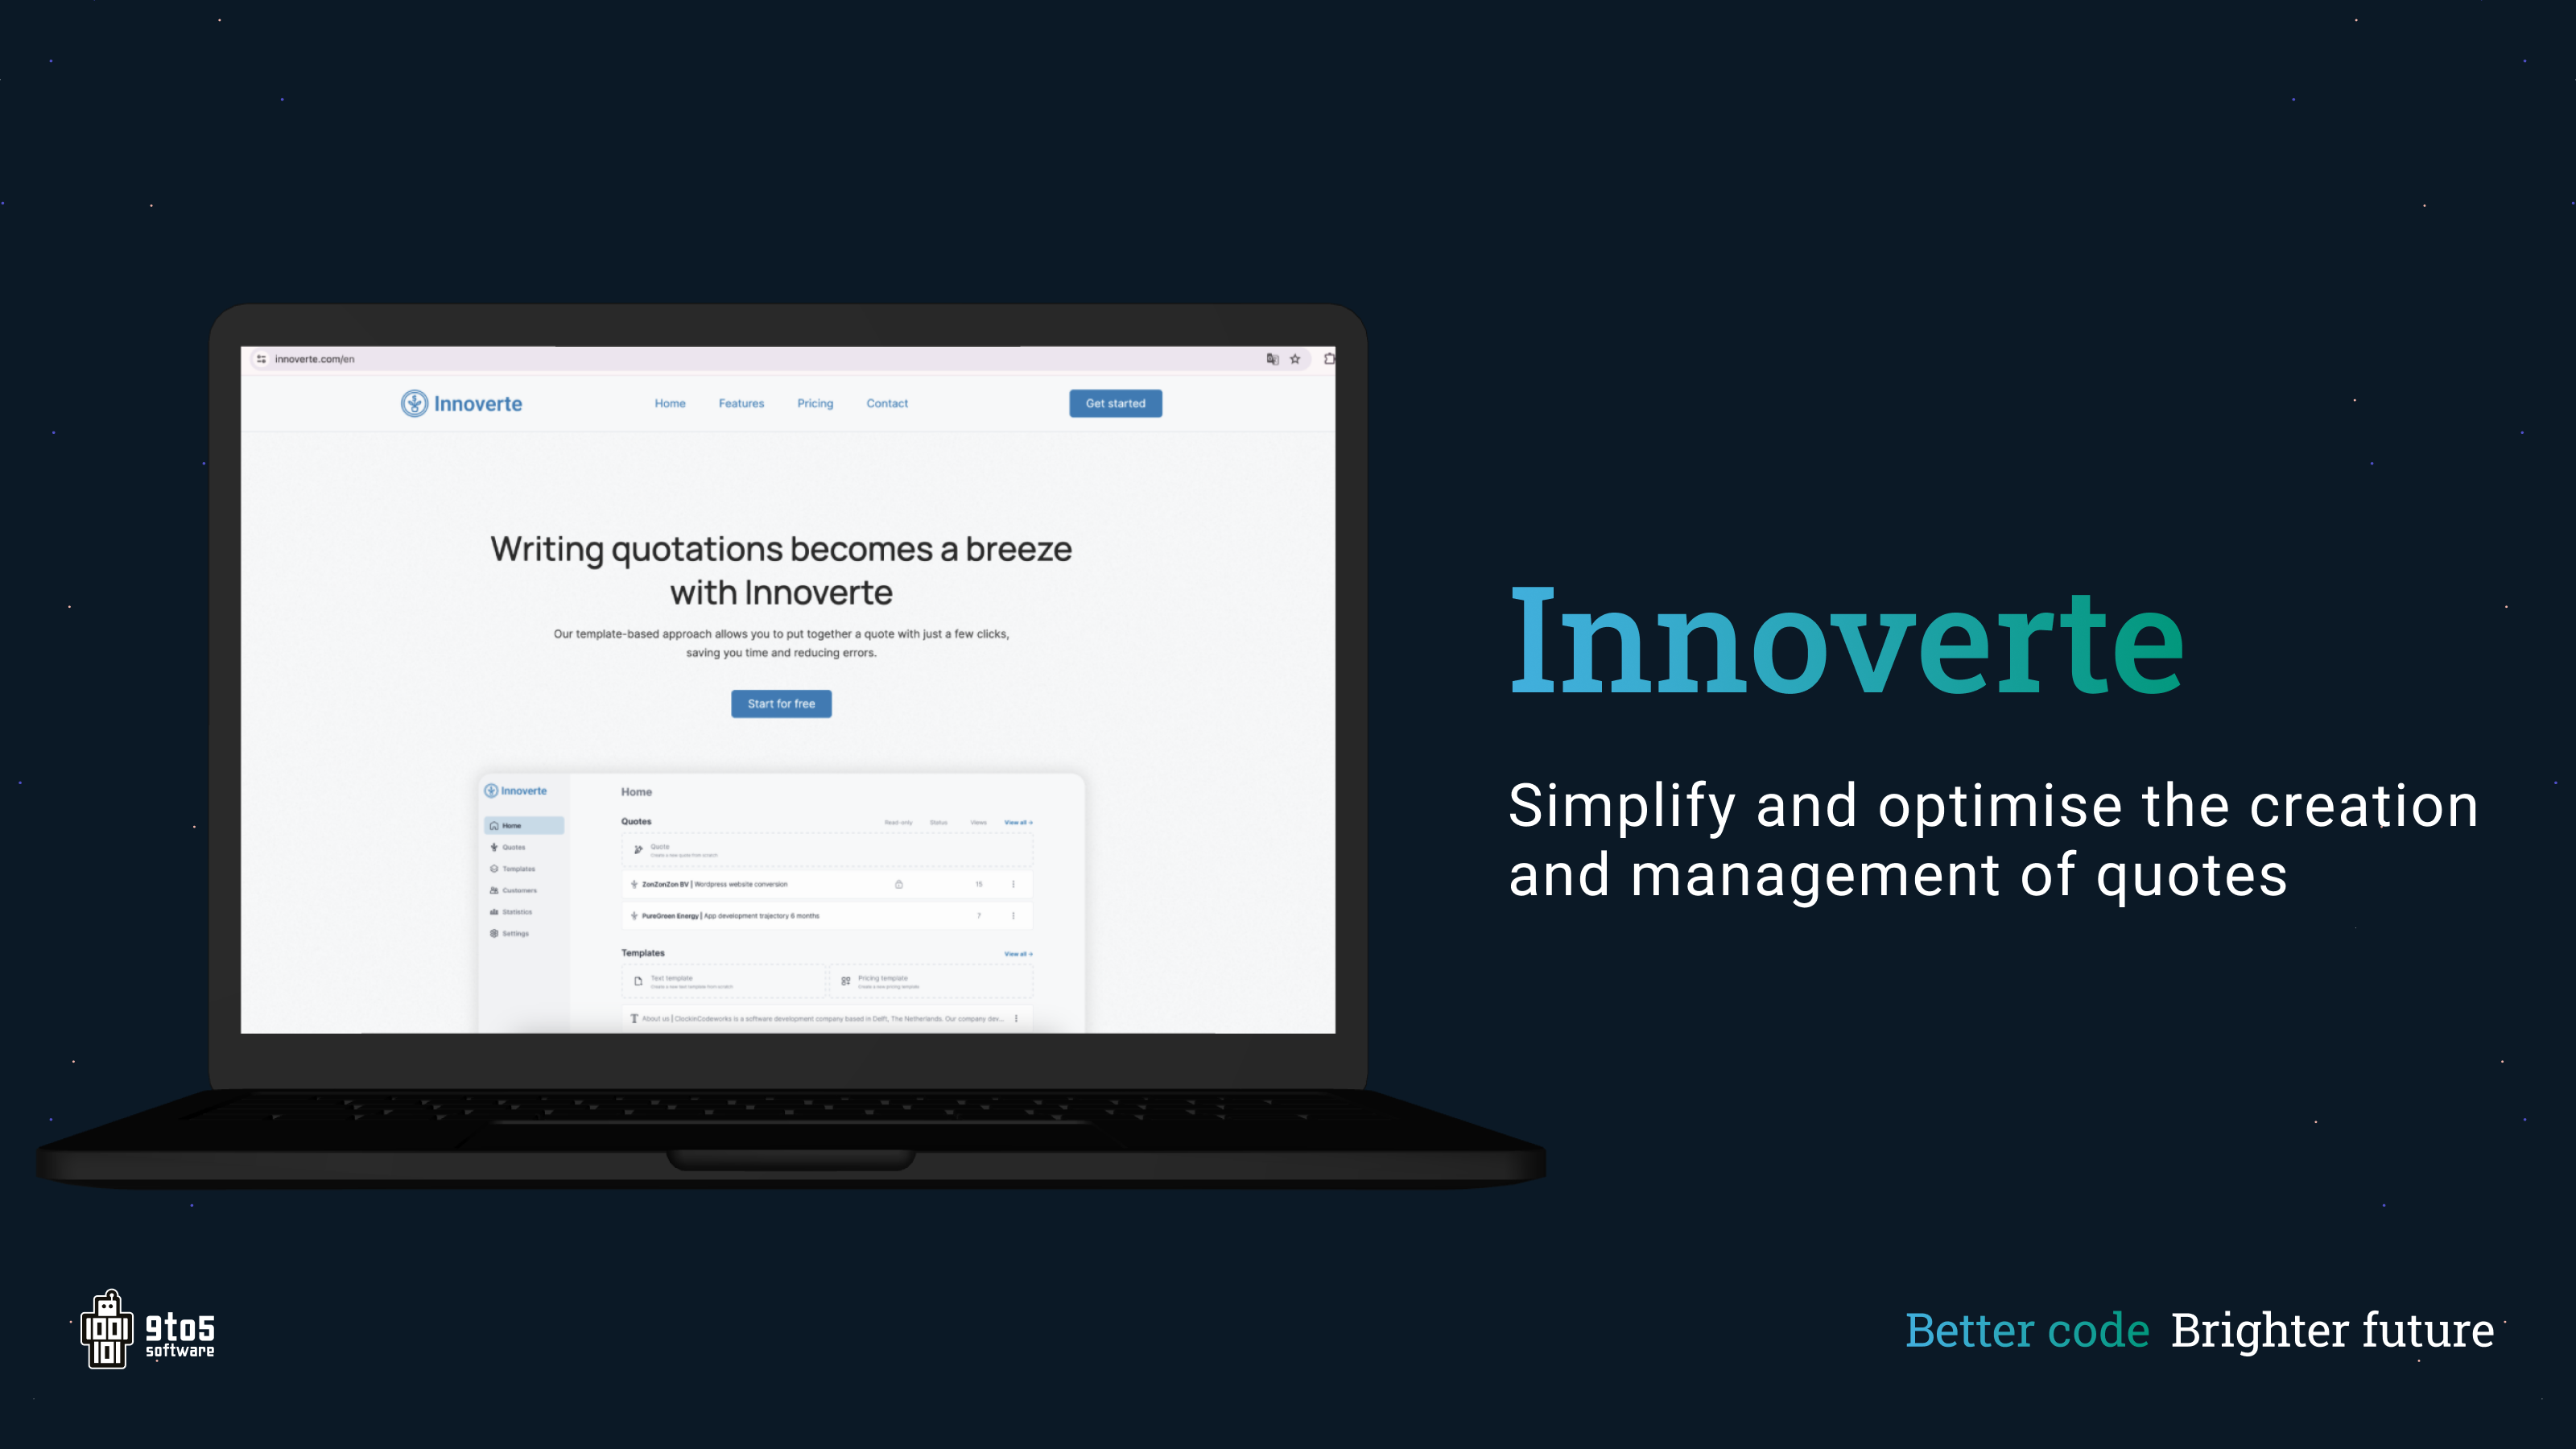 Innoverte - The new platform that simplifies and enhances the quoting process.